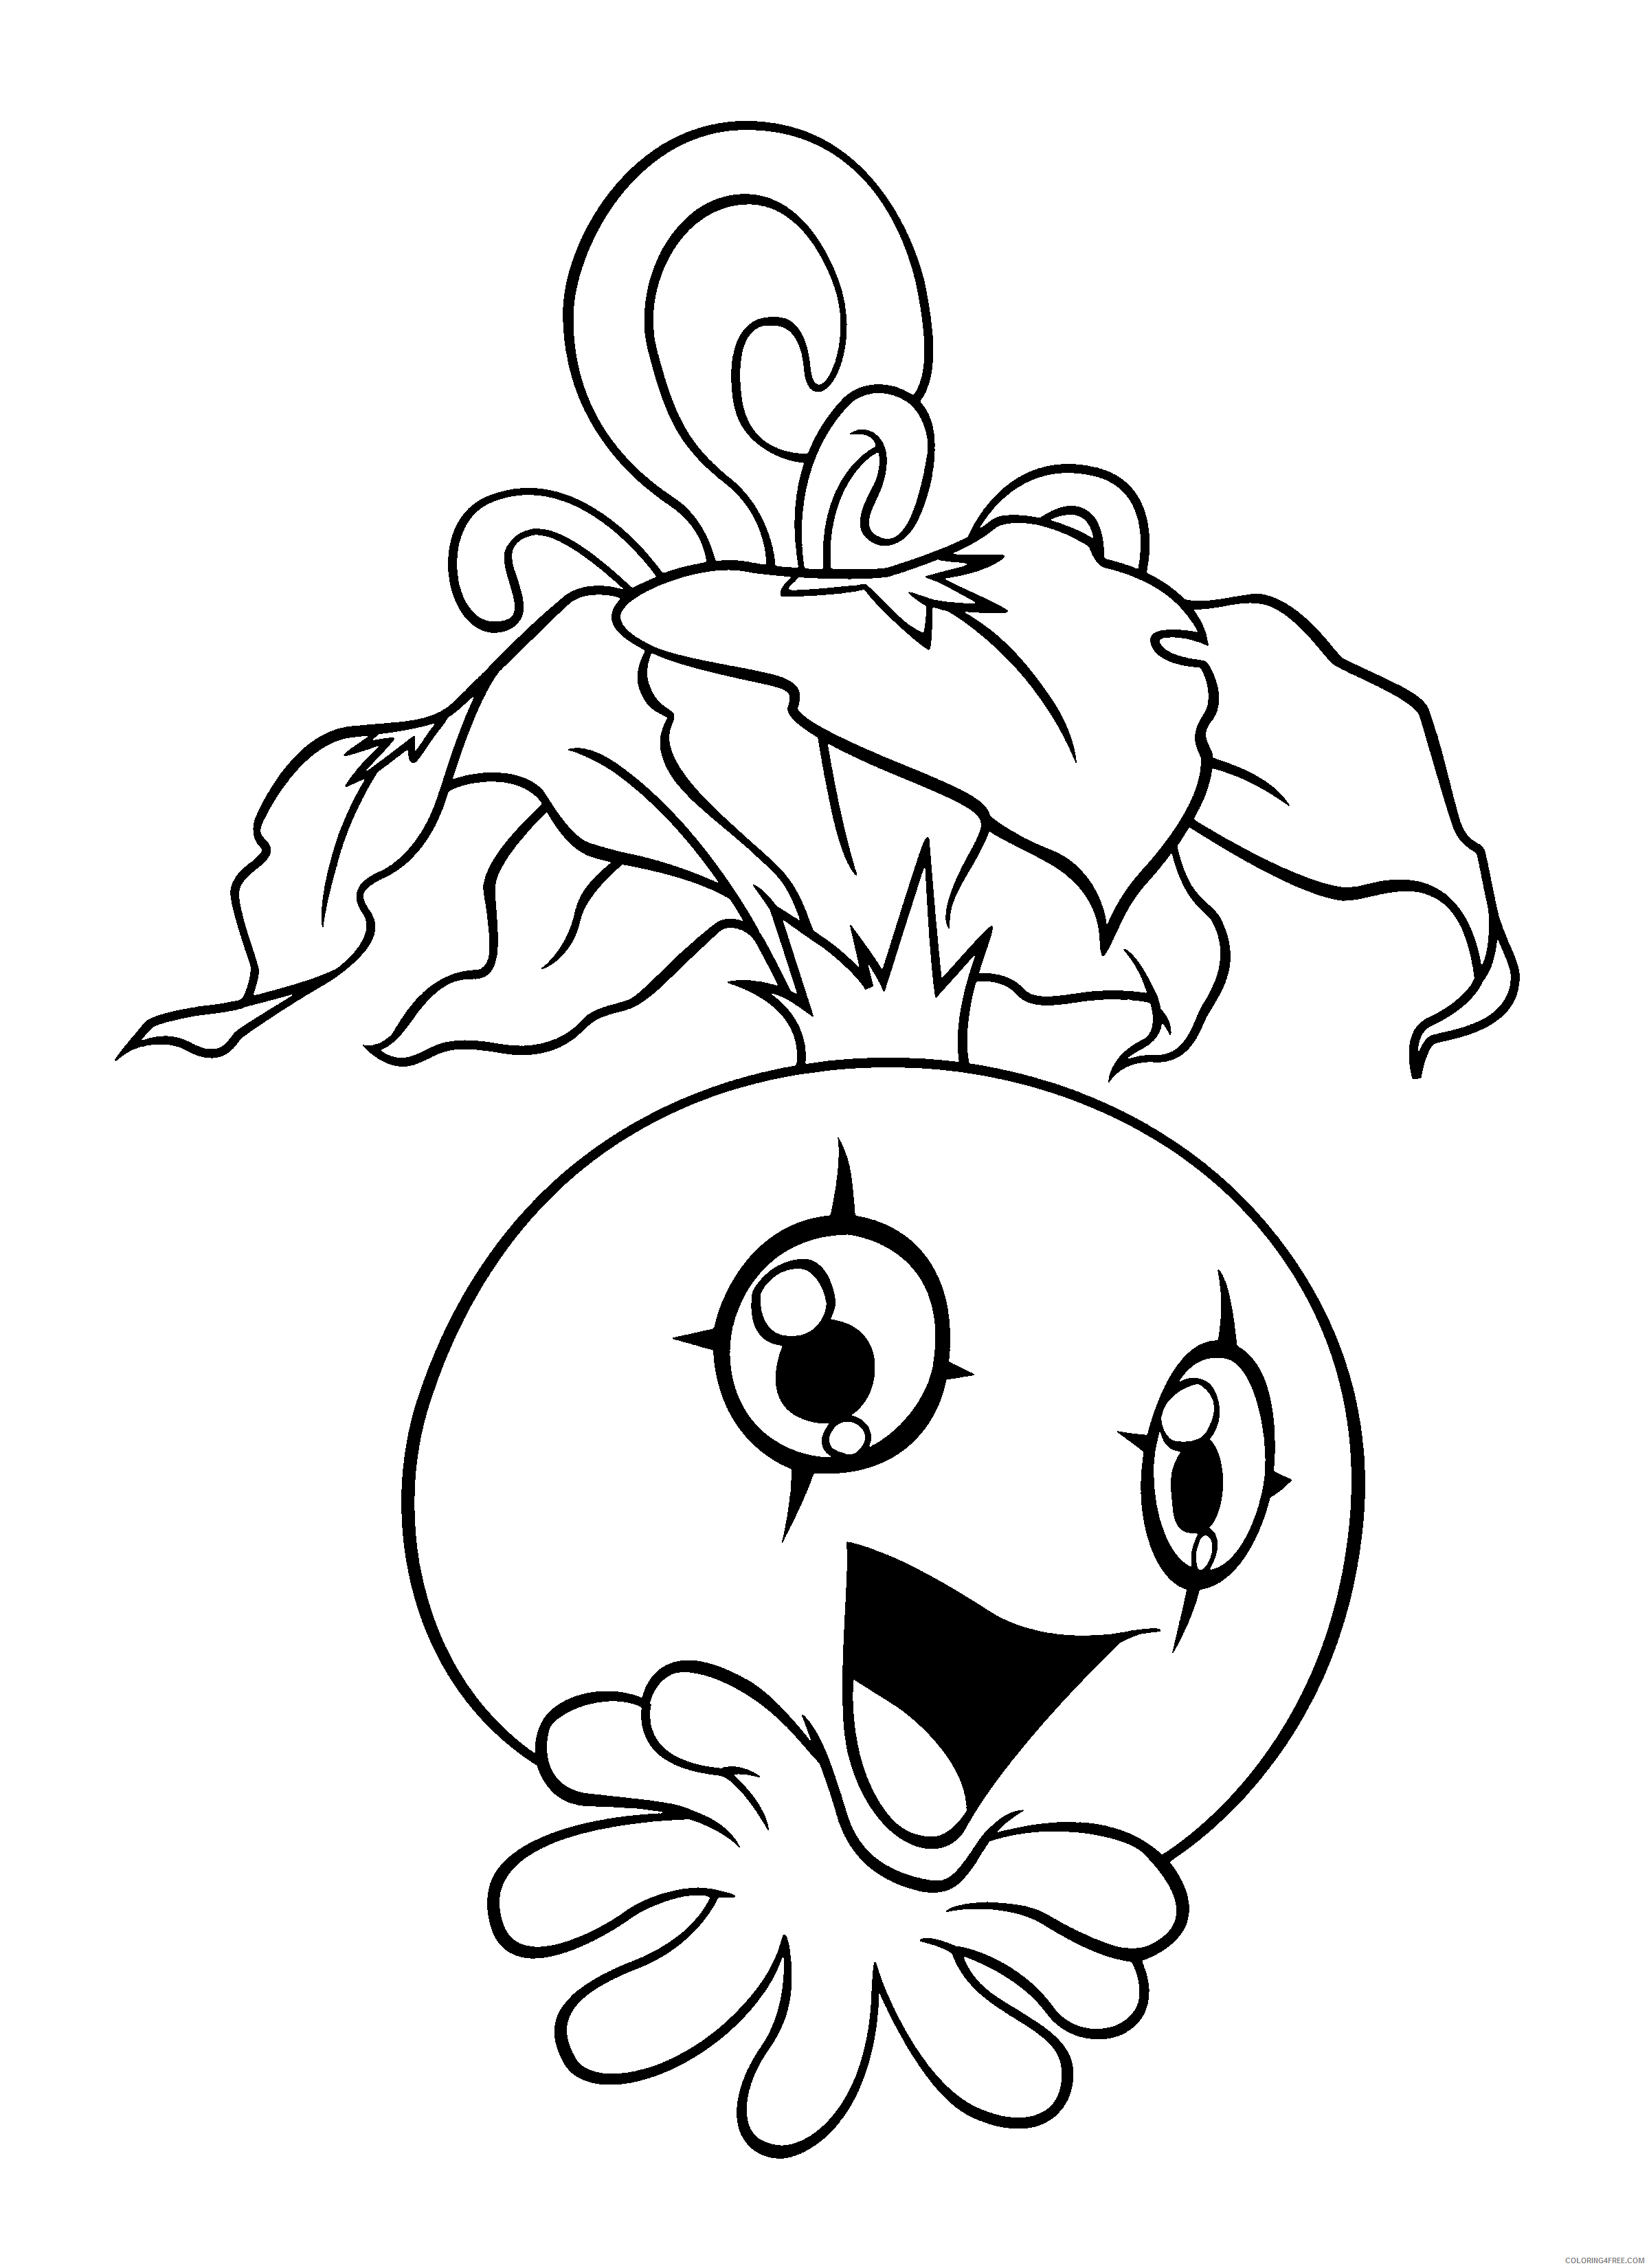 Digimon Printable Coloring Pages Anime digimon 254 2021 0335 Coloring4free